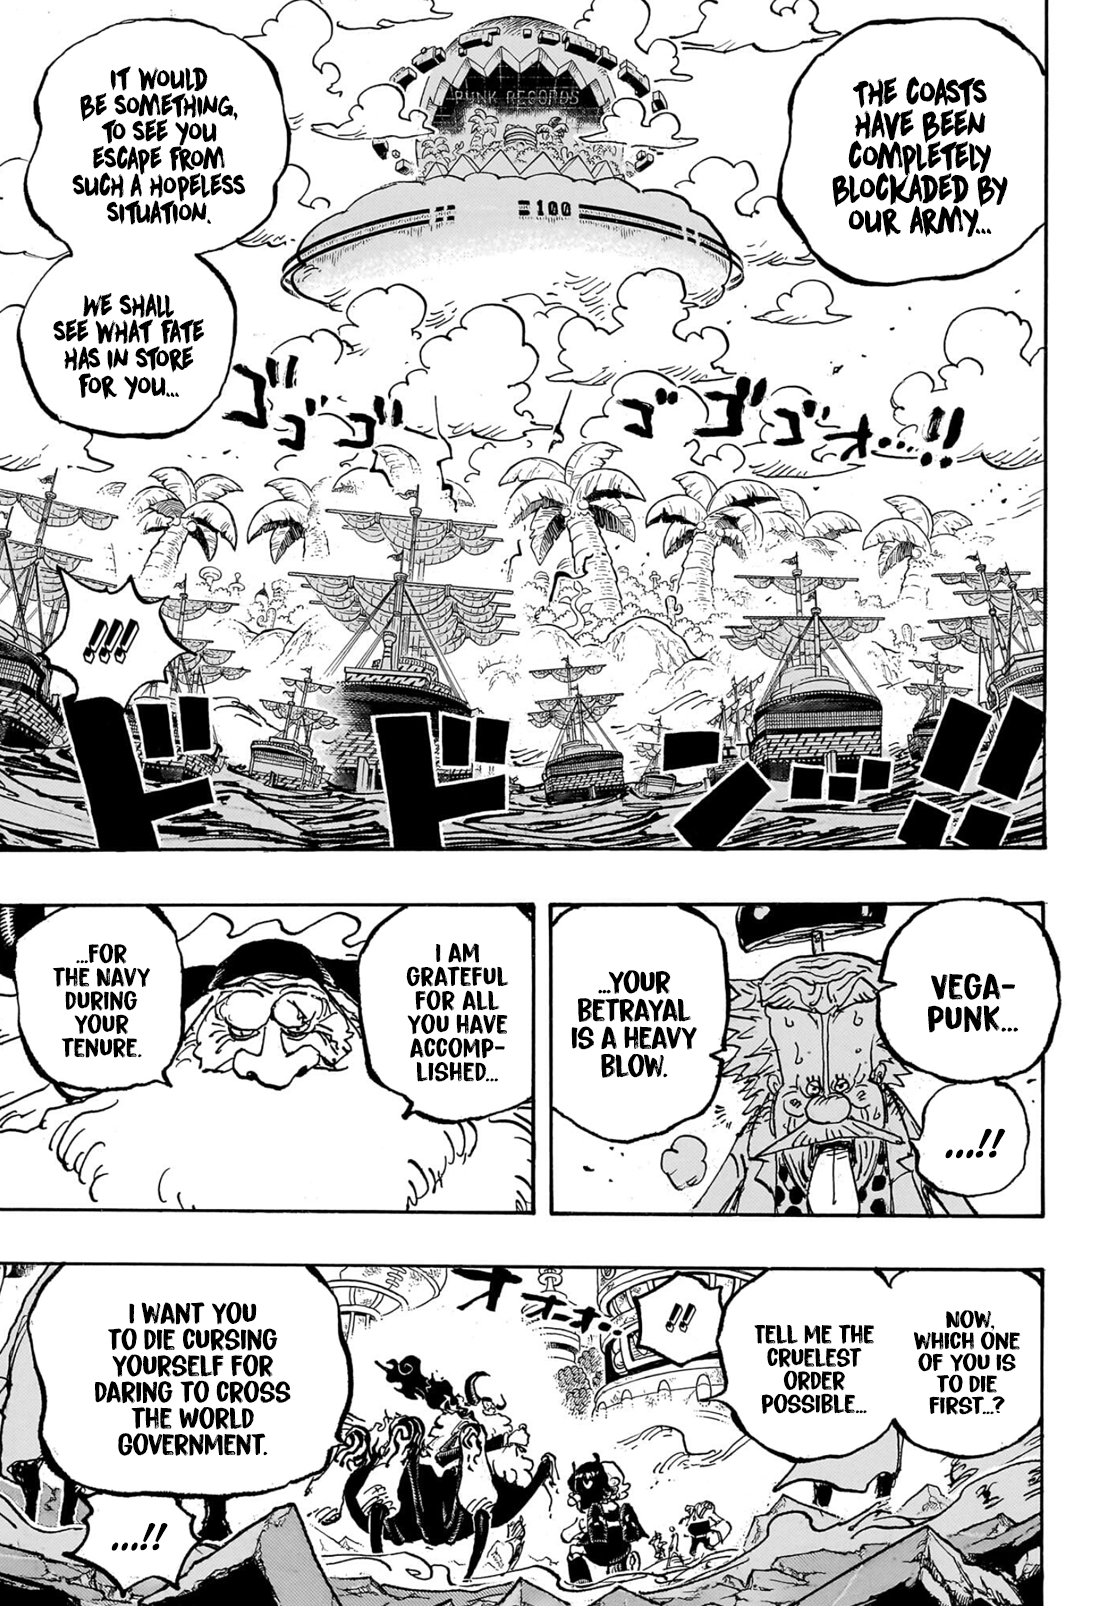 One Piece Chapter 1103: Raw scans, leaks, spoilers, plot summary and more -  Hindustan Times